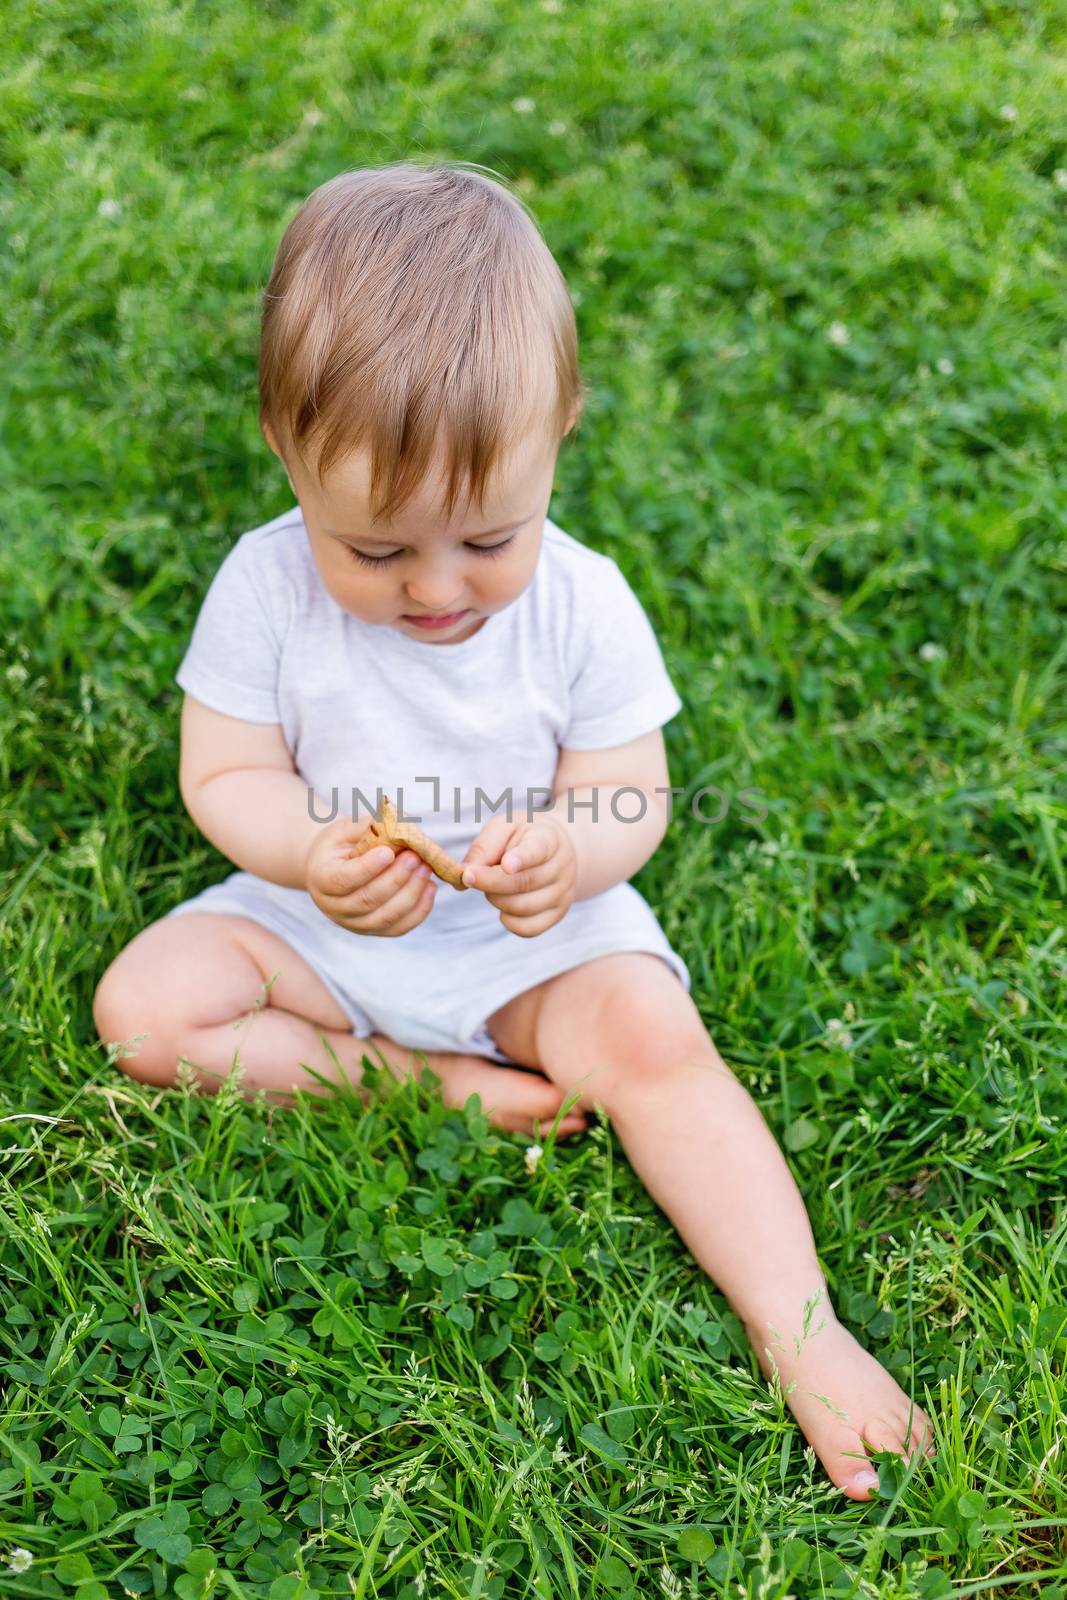 Little baby sitting on grass. Kid is staring on fallen leaf. Outdoor activity for kid. Natural background with child on summer lawn with fresh grass.